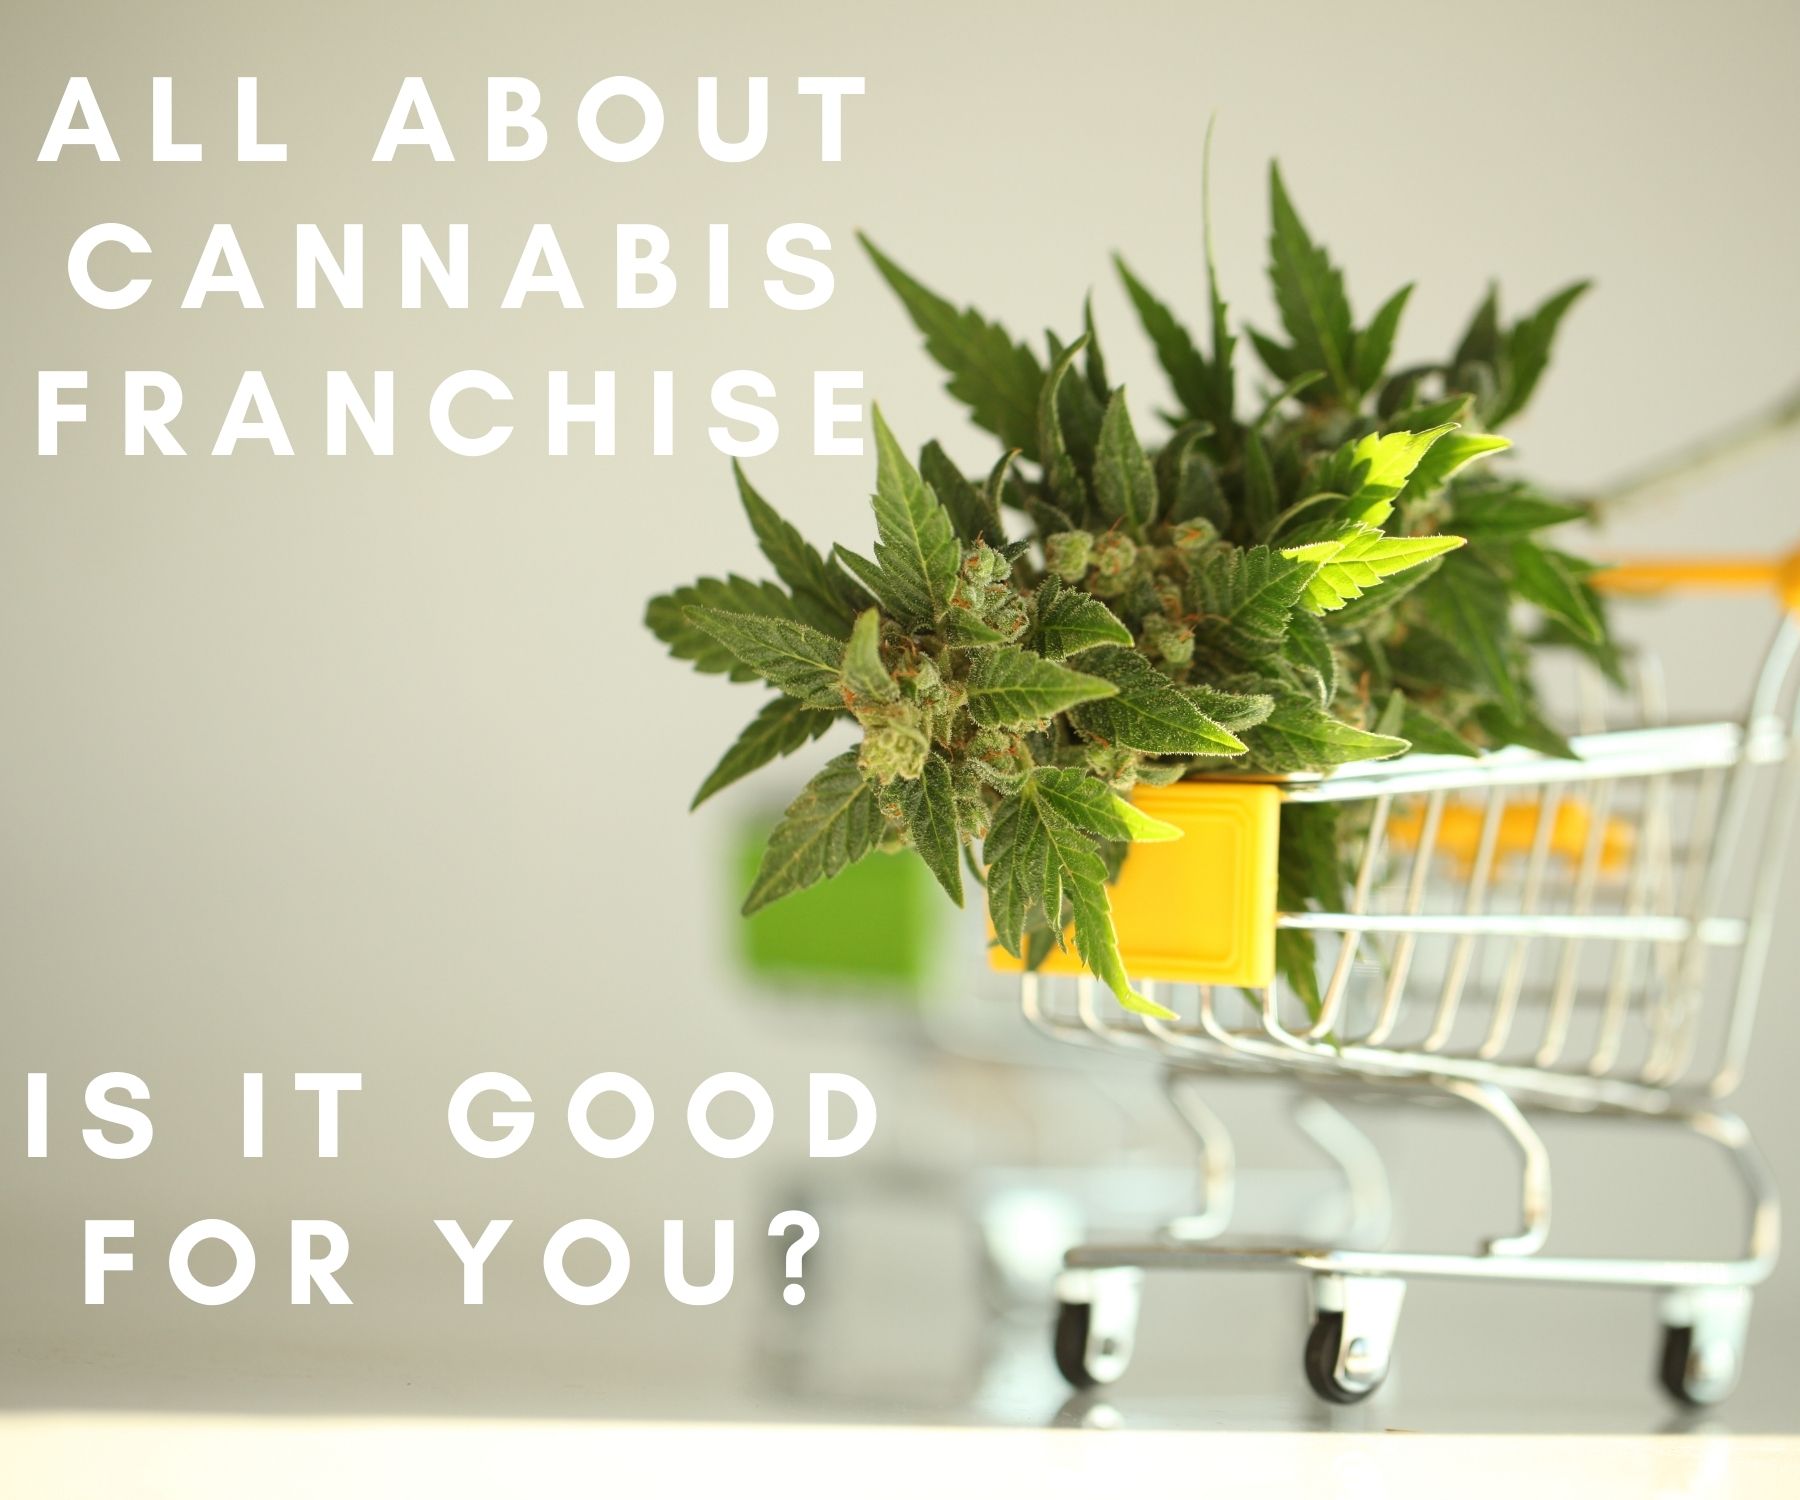 All about Cannabis Franchise - Is it good for you?